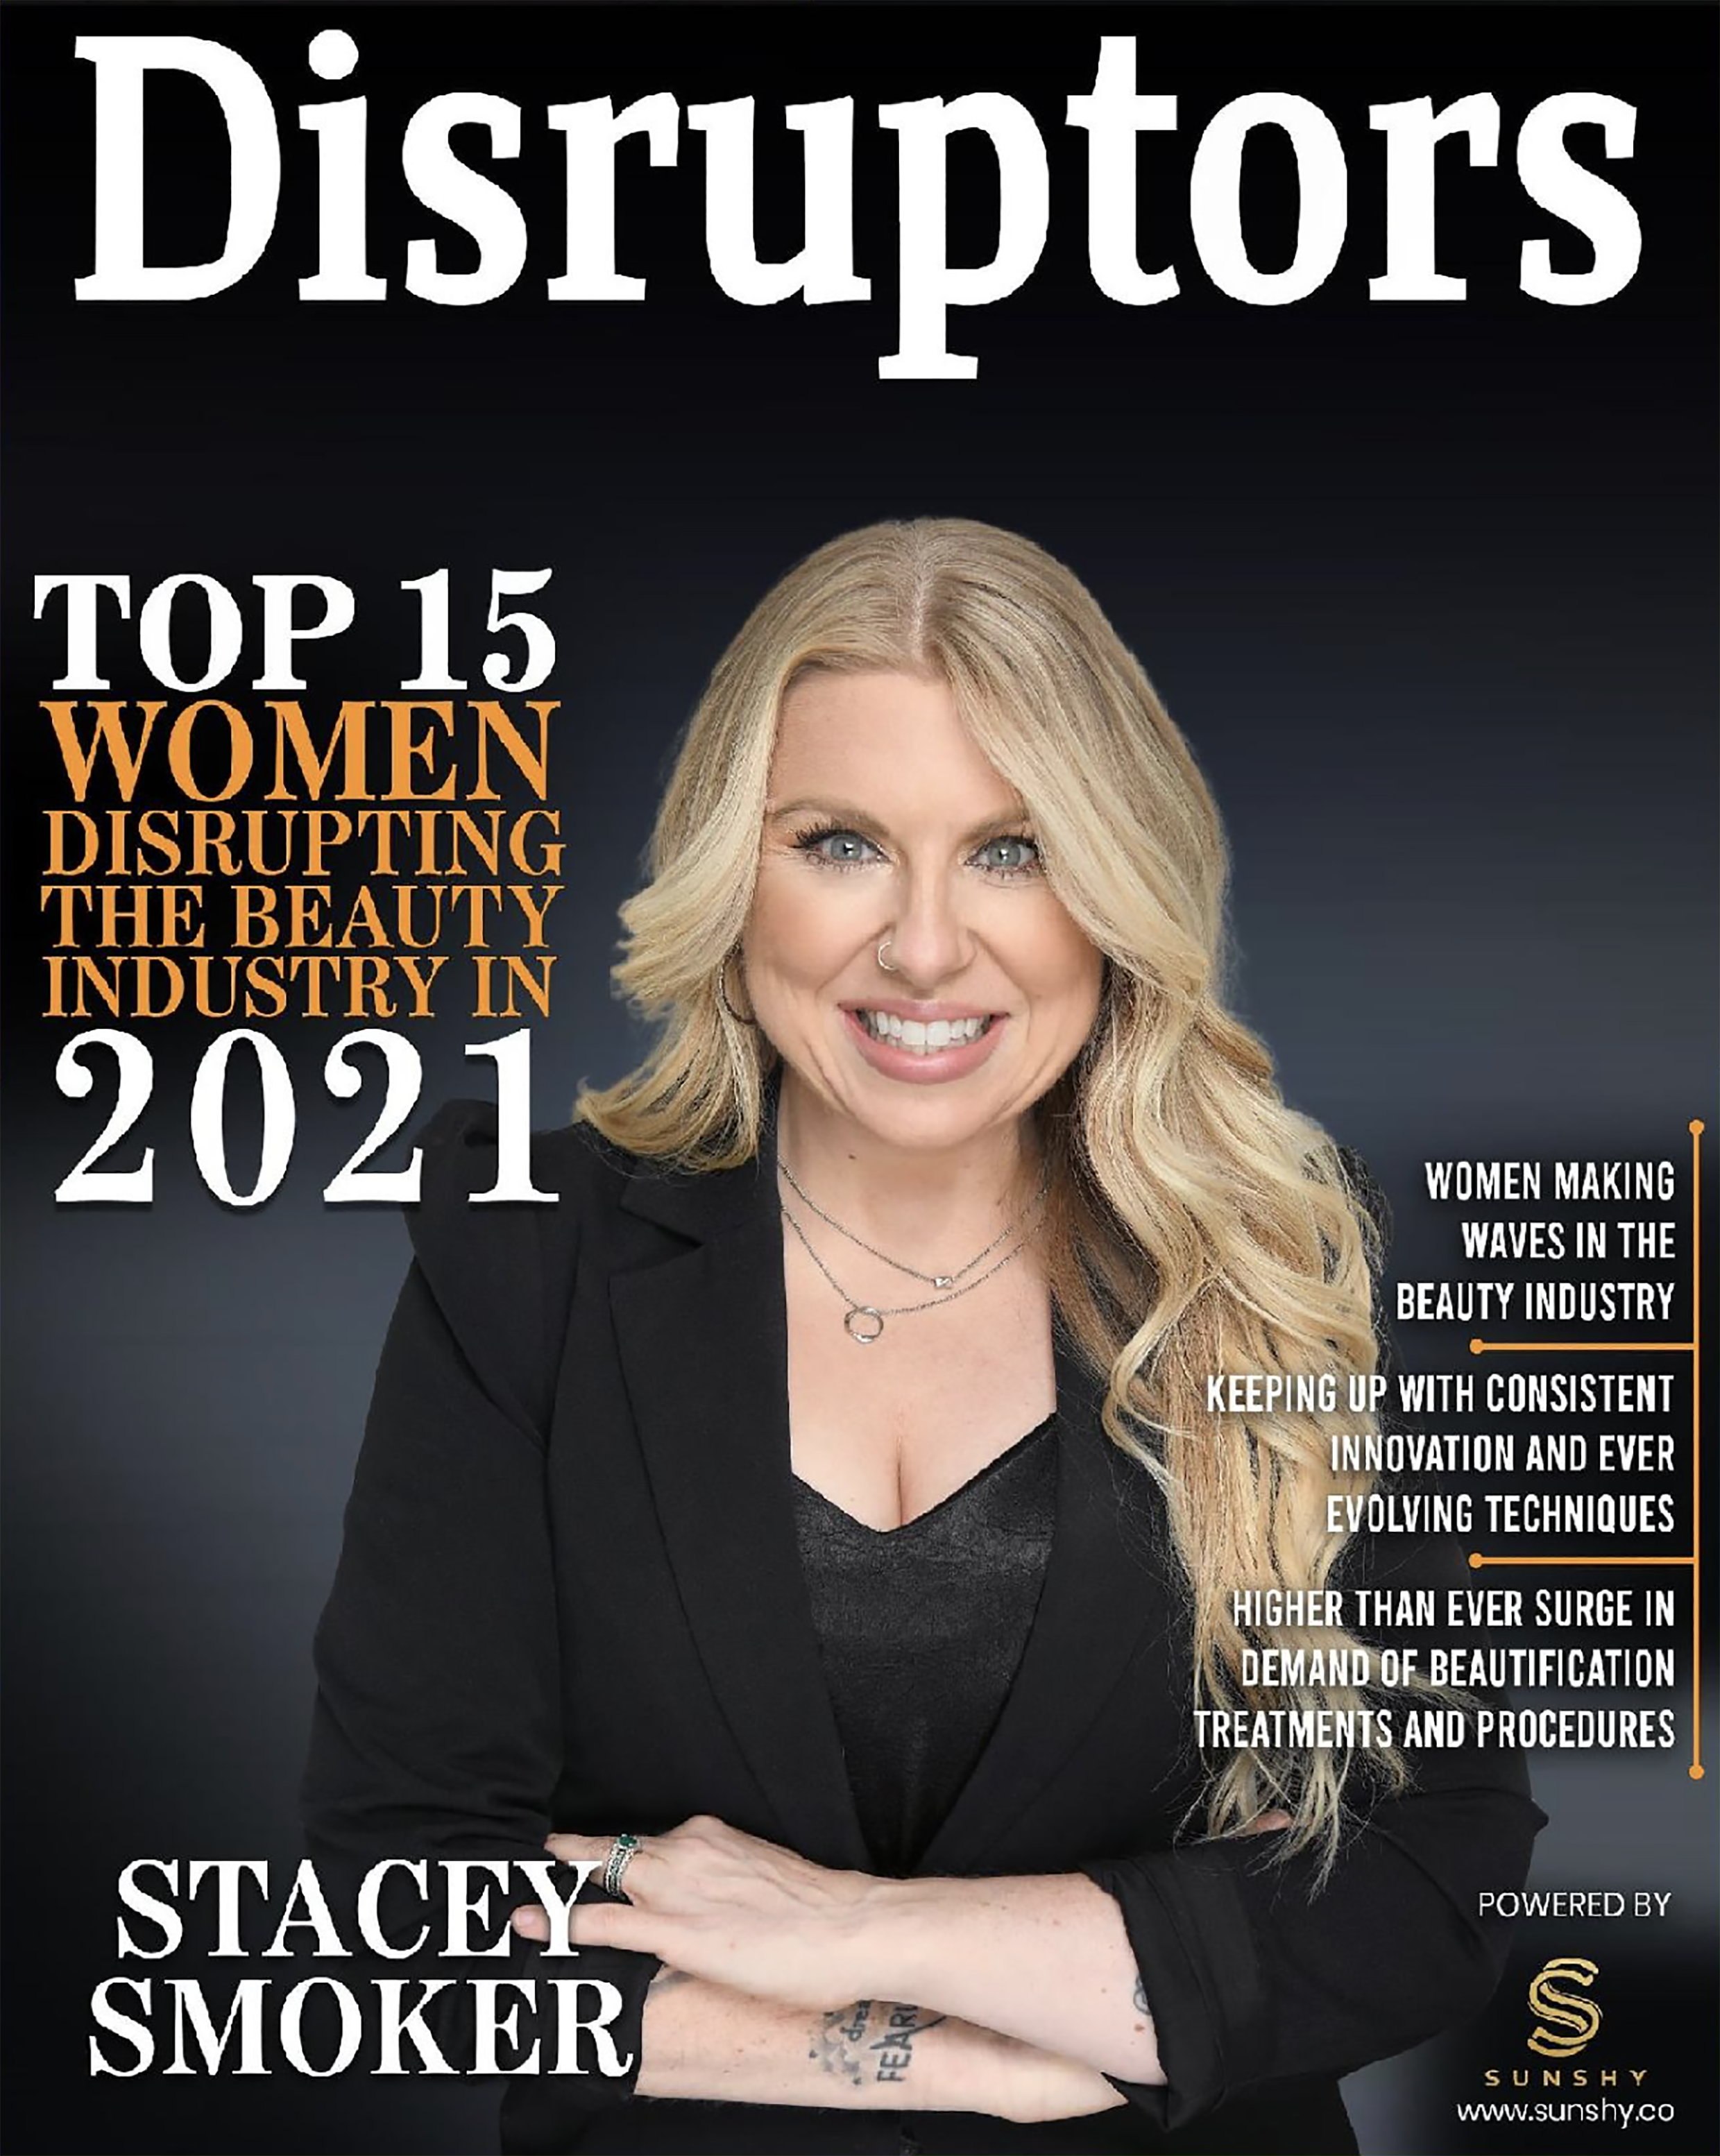 DISRUPTORS Magazine, July 2021 - photo by Andrew Werner.png